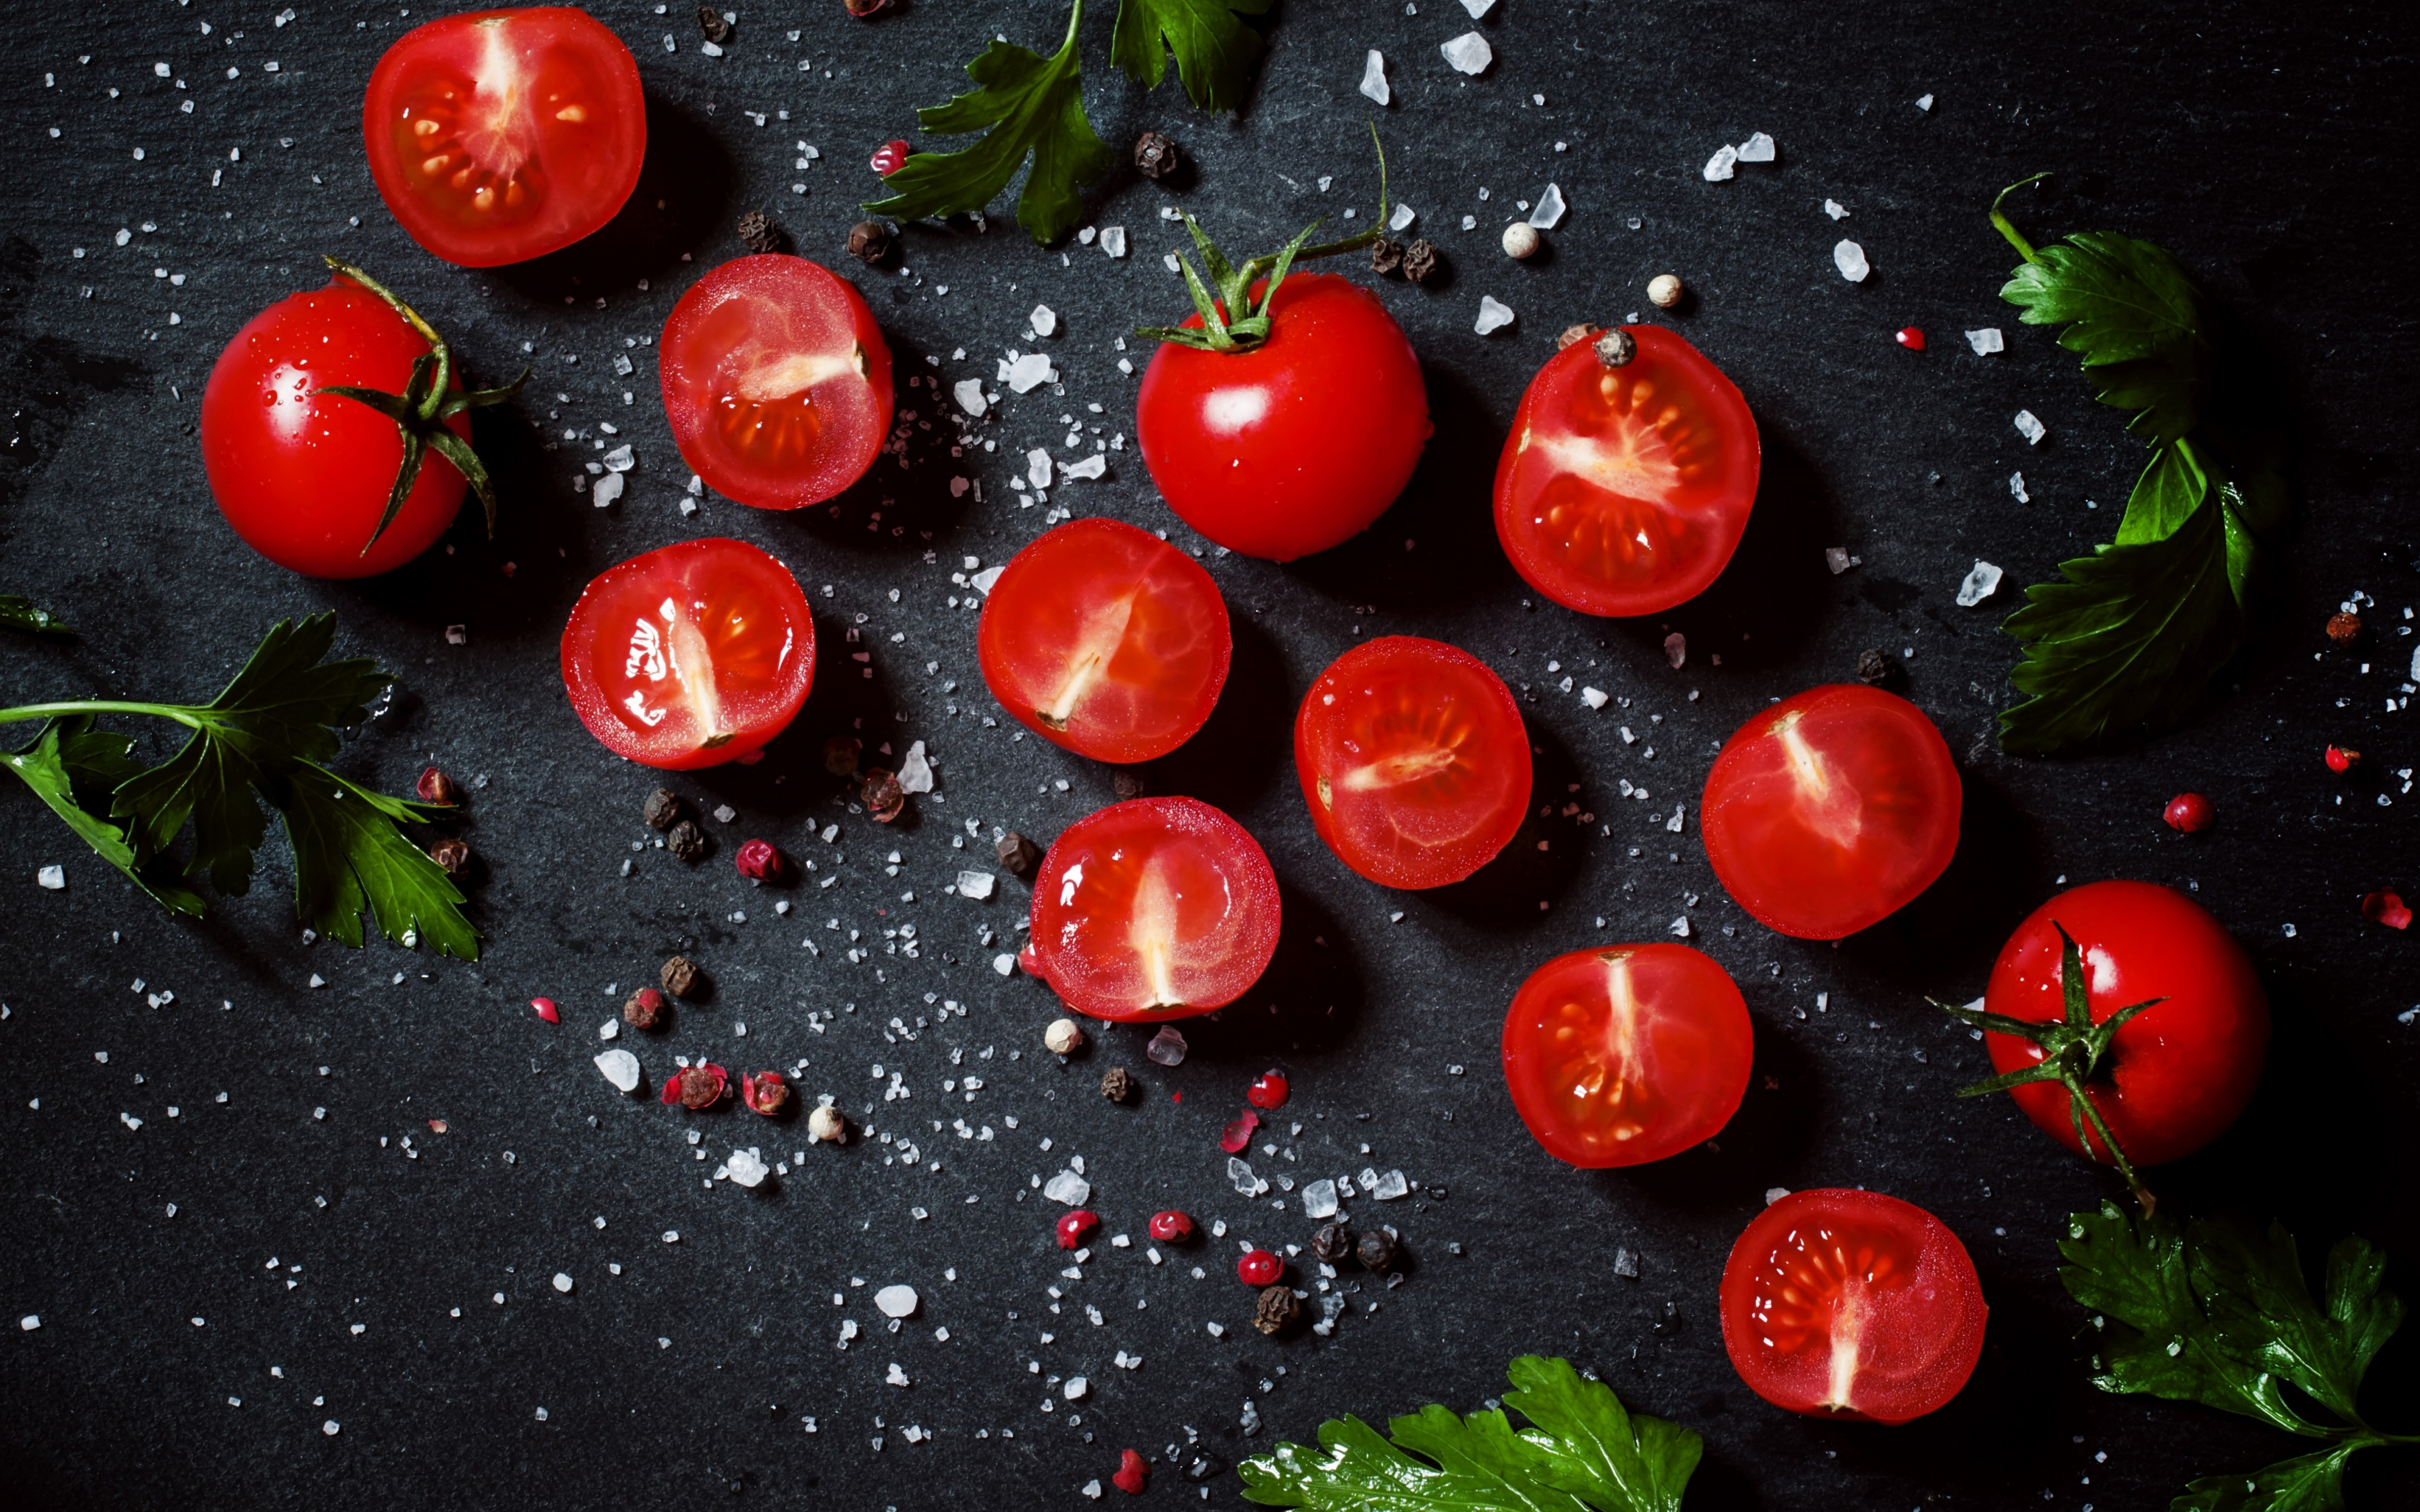 Download 3840x2400 wallpaper tomato, vegetables, kitchen, 4k, ultra HD 16: widescreen, 3840x2400 HD image, background, 848